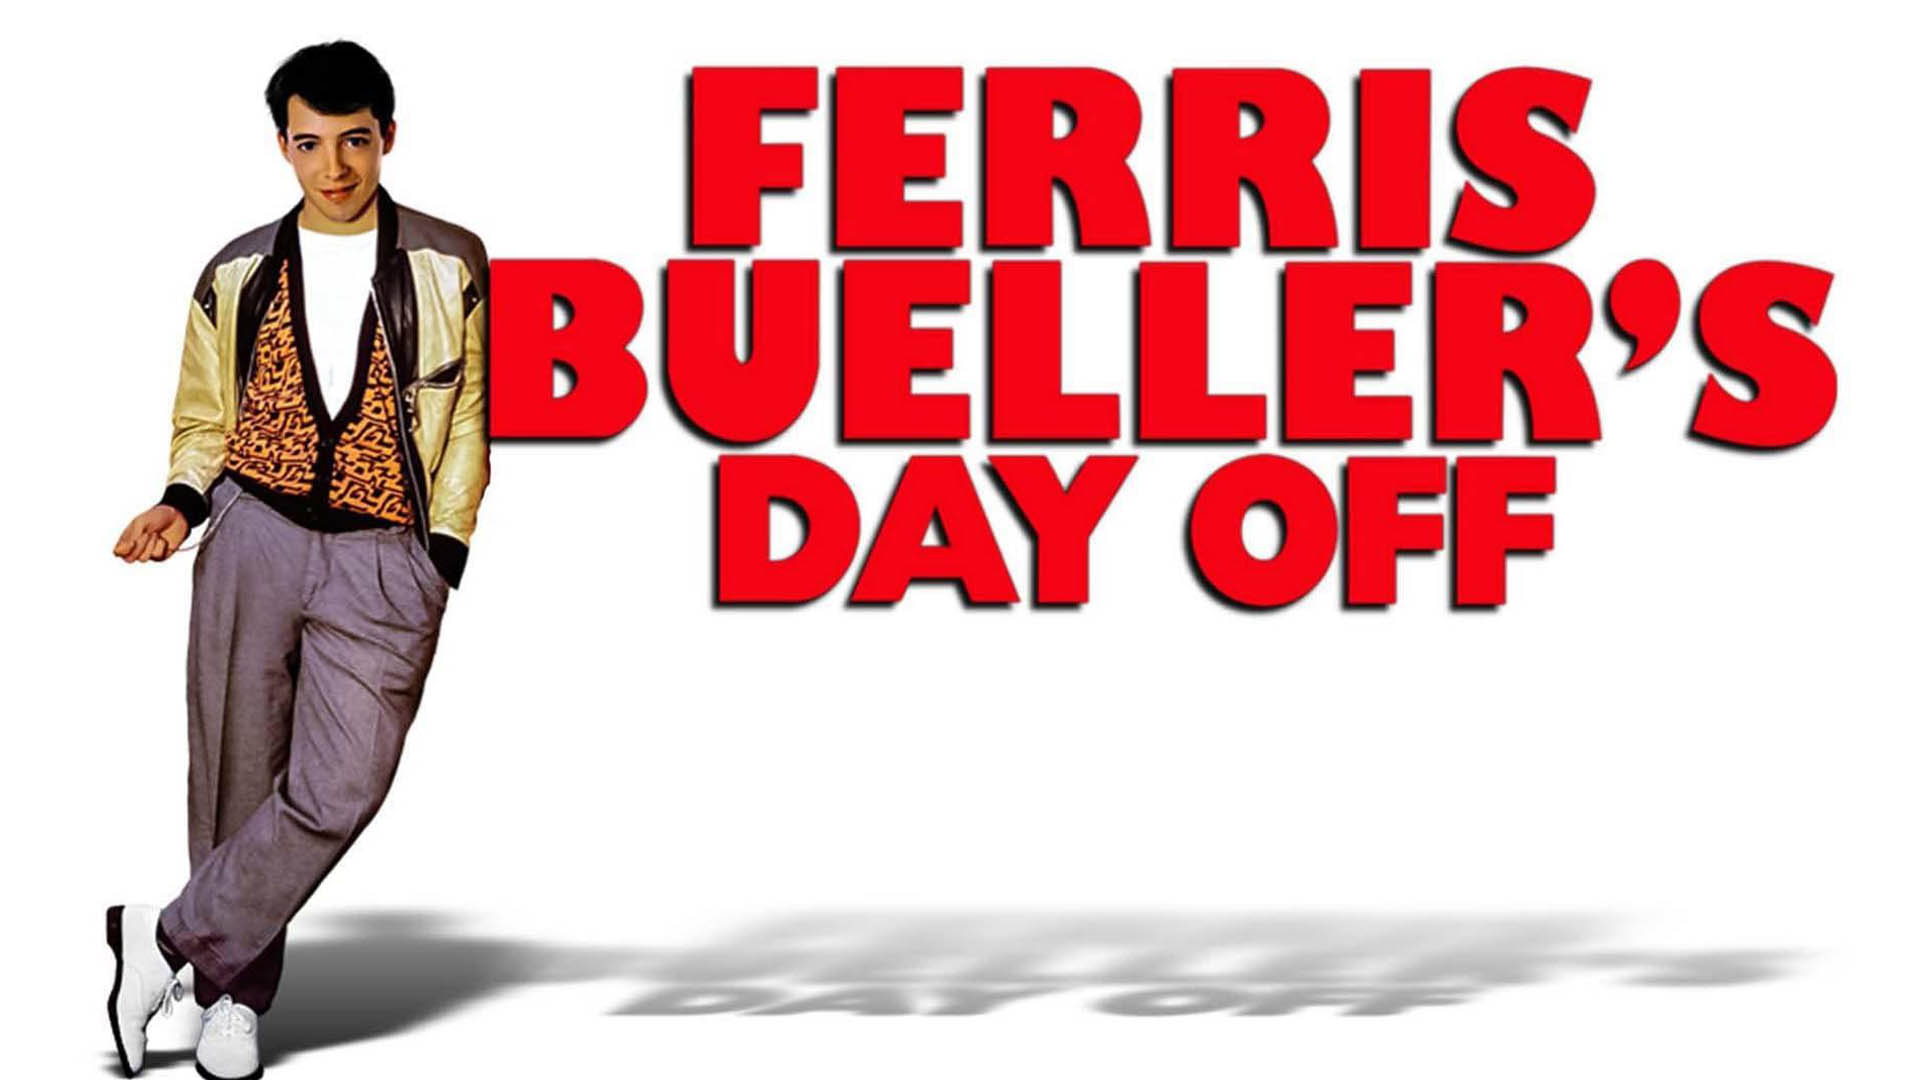 Ferris Bueller's Day Off movie cover with Matthew Broderick